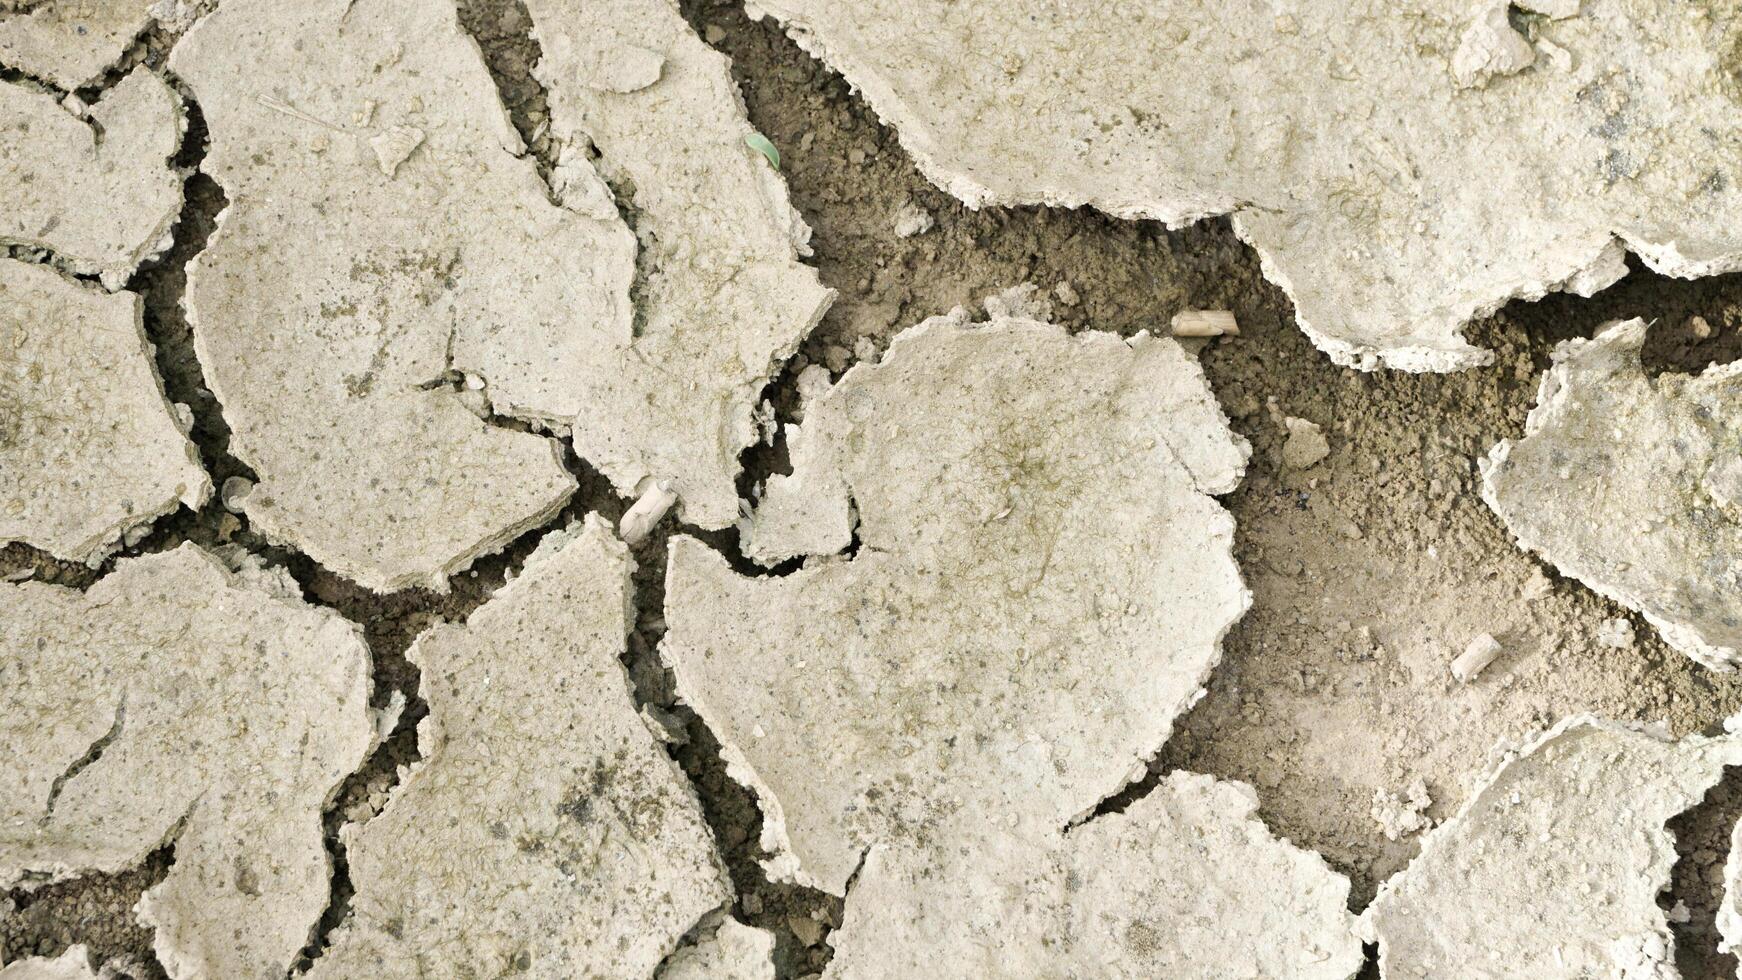 the ground cracks during the prolonged dry season photo